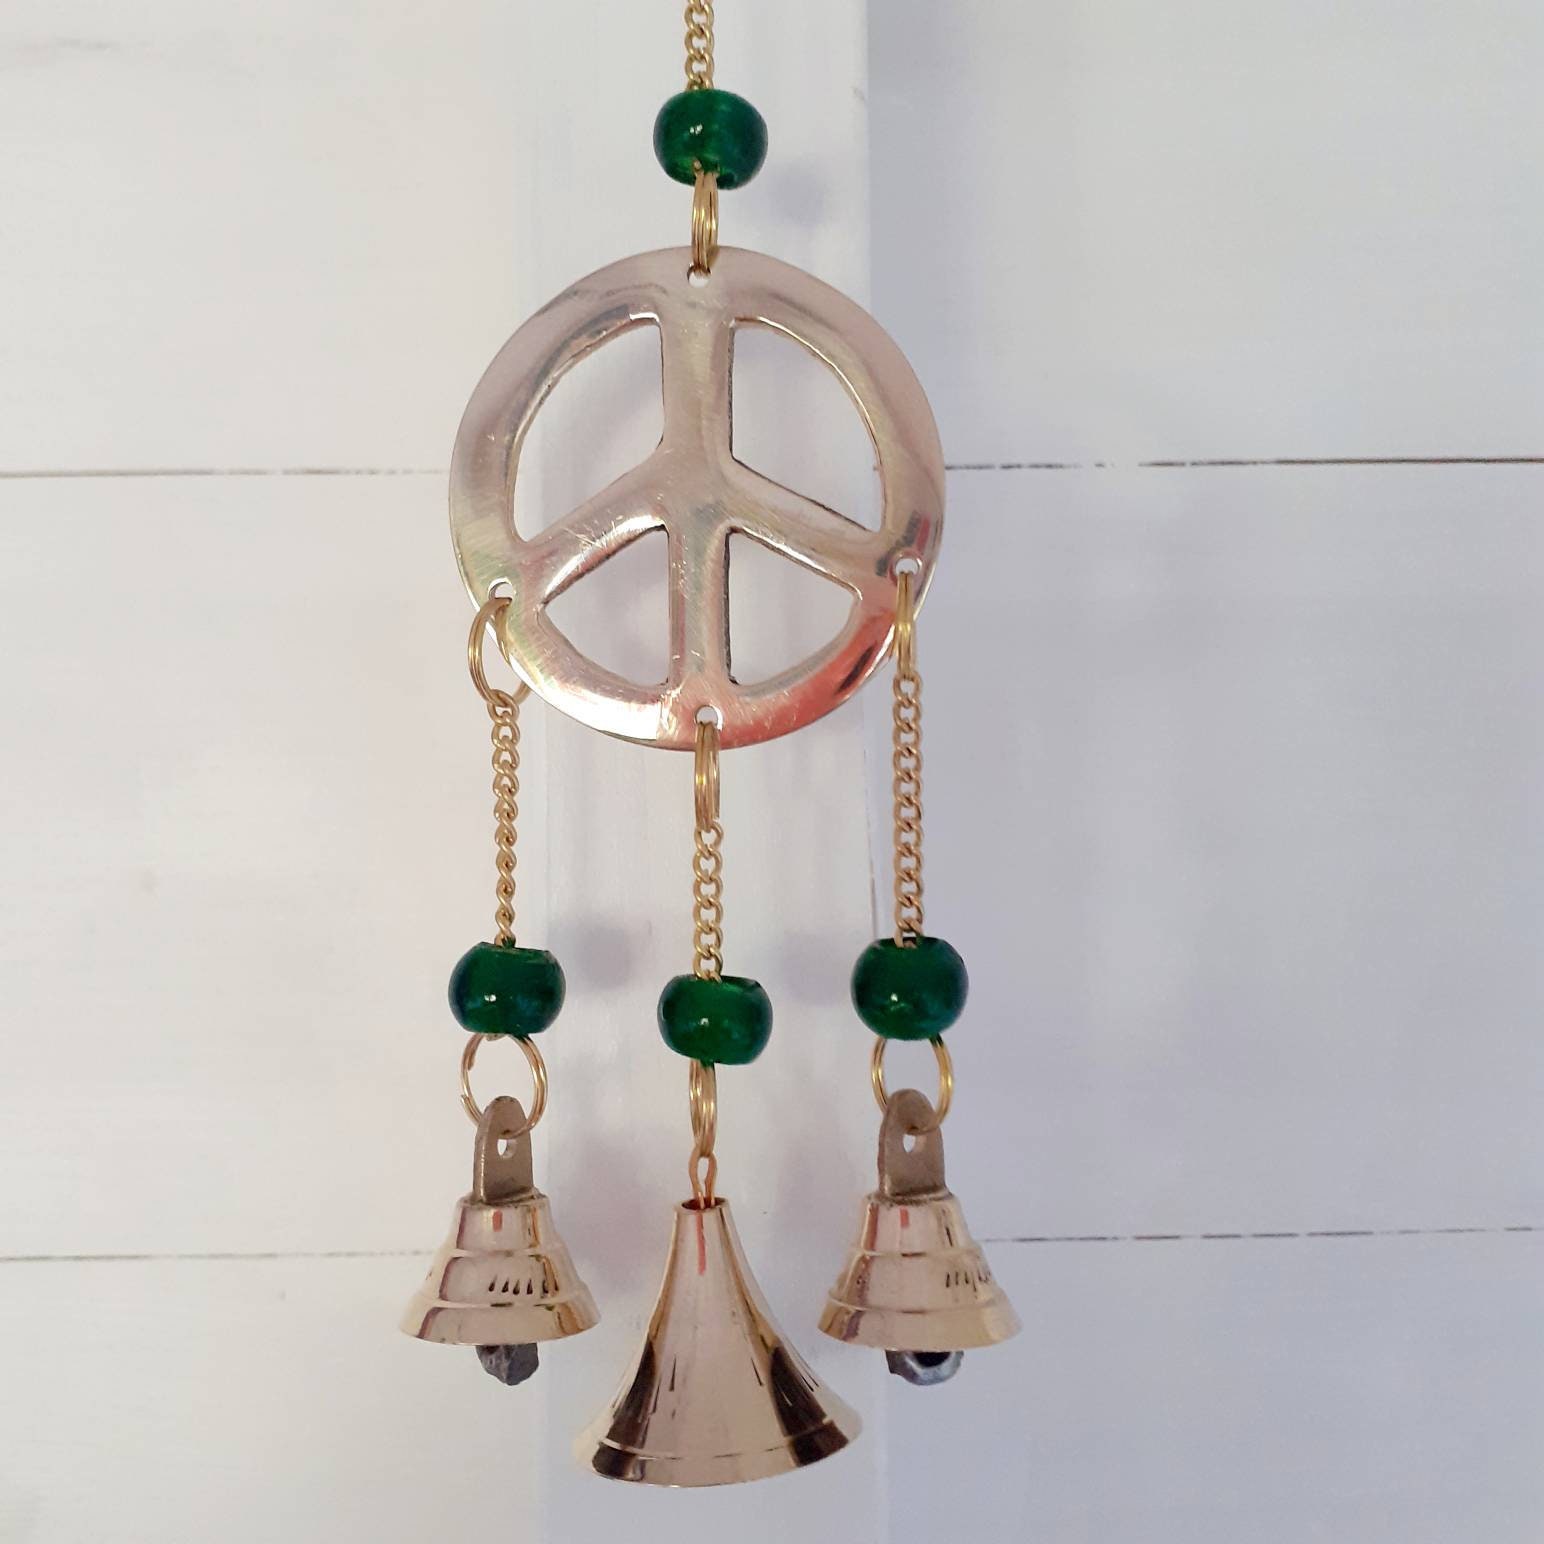 Buy Small Peace Symbol Windchime Online in India 